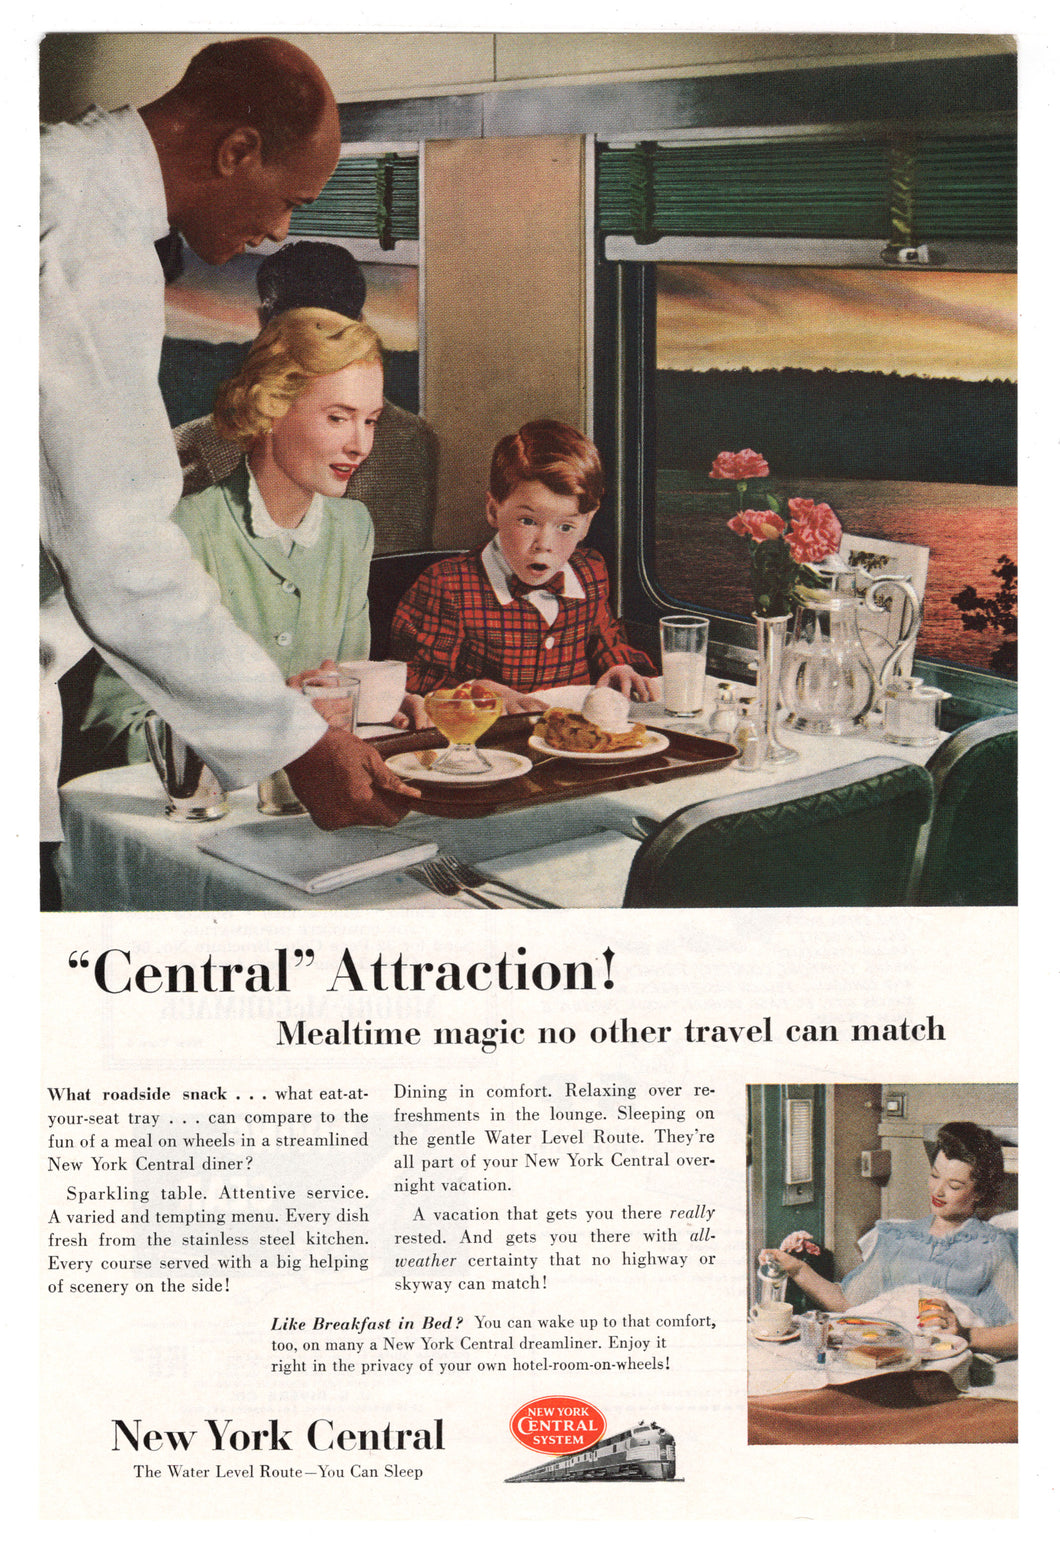 New York Central Railway Vintage Ad - (Central Attraction) # 500 - 1960's